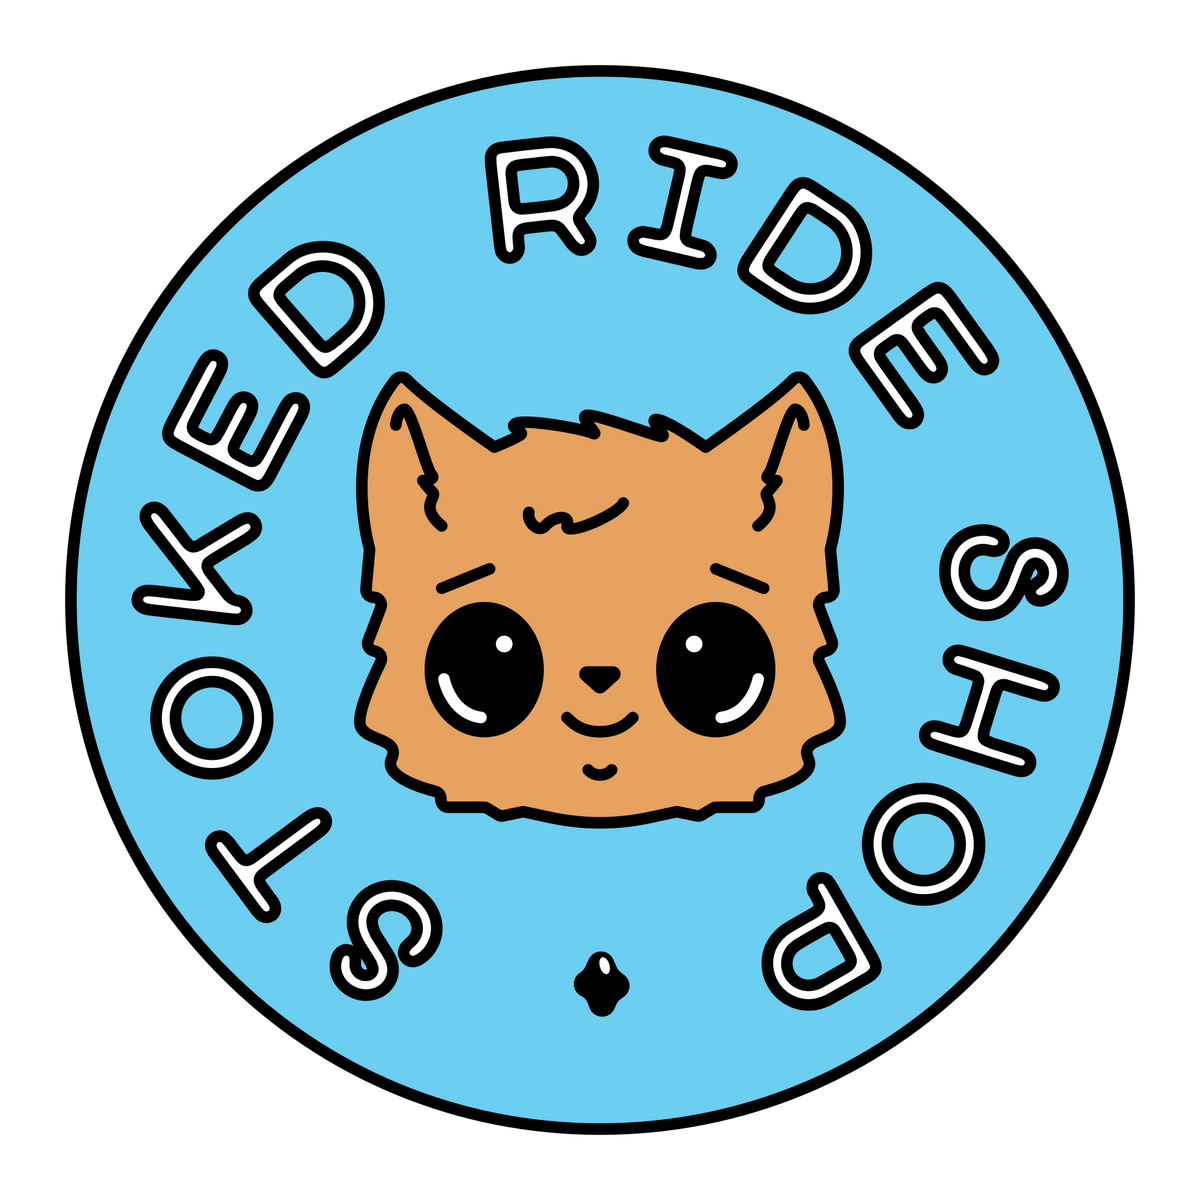 Stoked Ride Shop Sticker, Cute Kitty